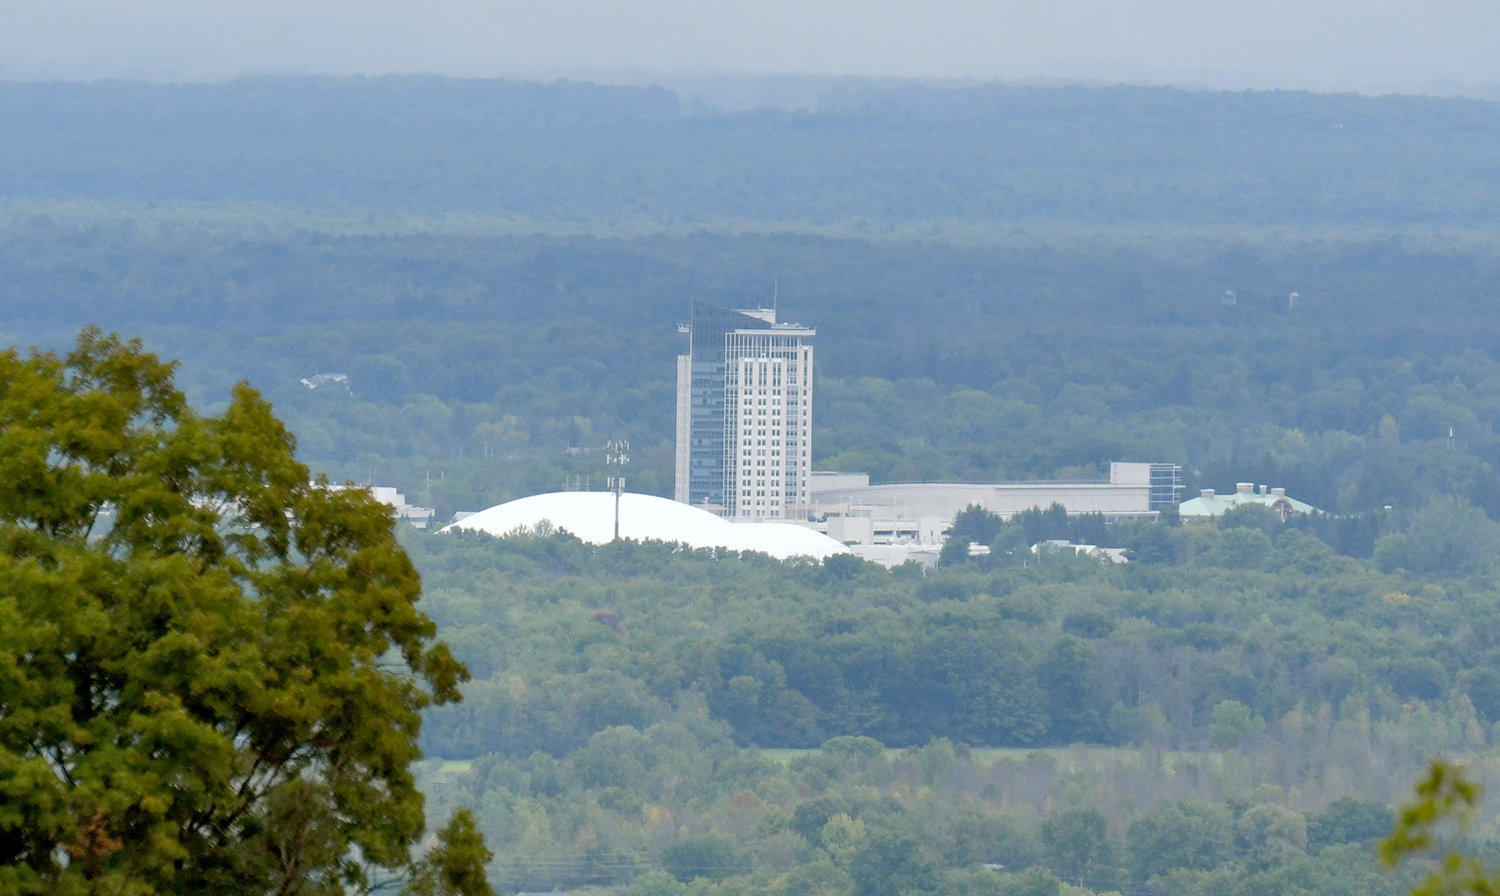 The Turning Stone Resort Casino with its iconic Tower Hotel rises up in this view from Peterboro Road in Oneida. Officials say a massive expansion at the resort, the largest in 20 years, will nearly double its convention and meeting space and also include a new hotel.